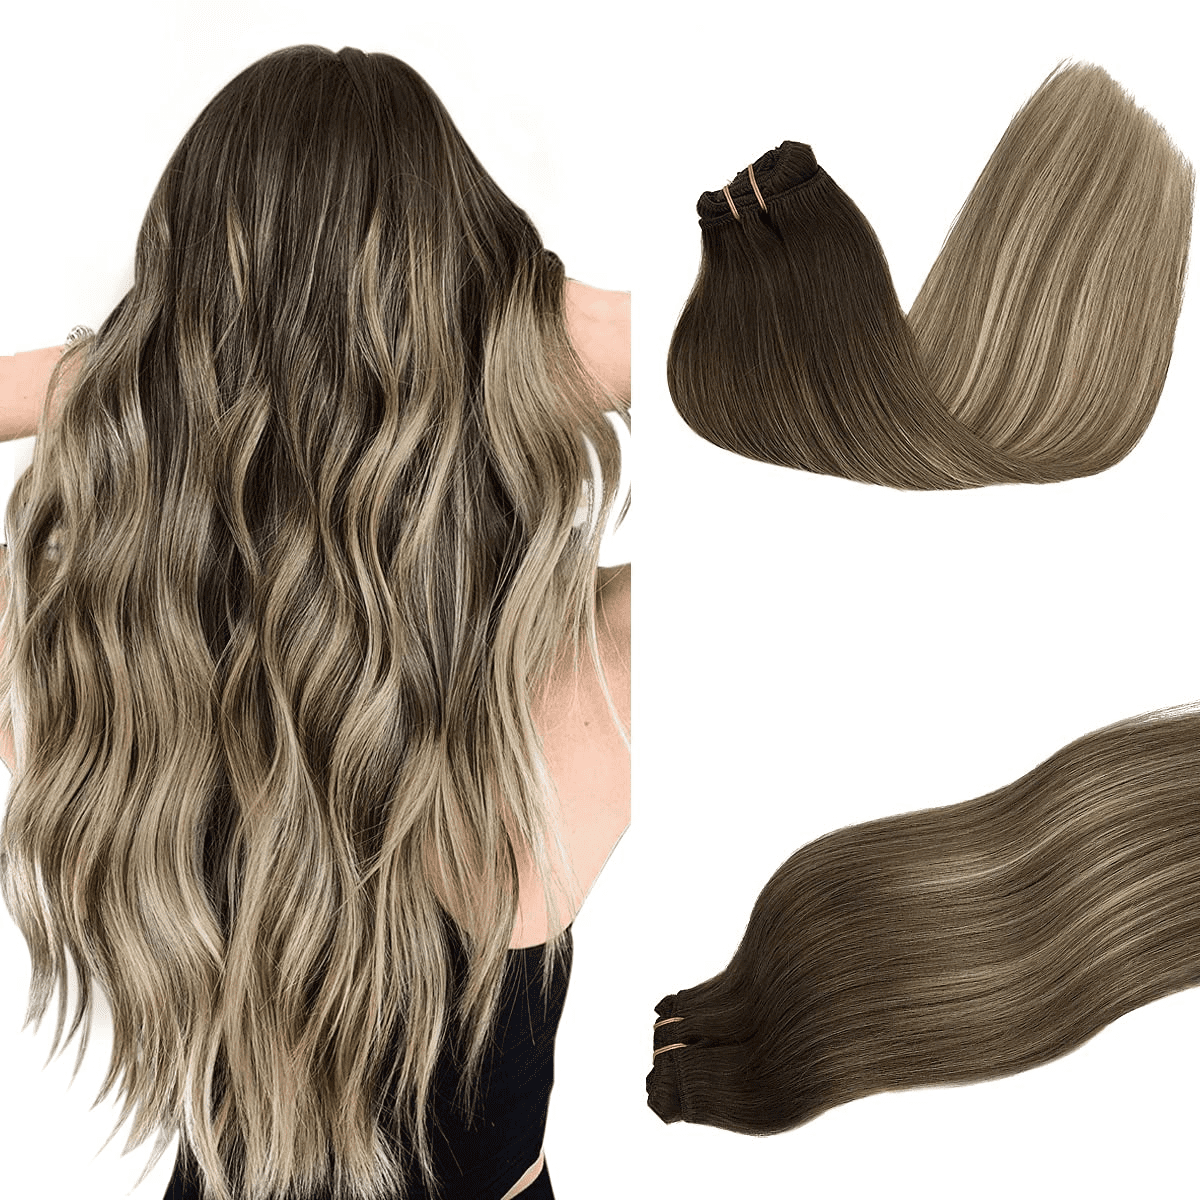 Clip In Hair Extensions Human Hair Thickened Double Weft Remy Hair 120g  7pcs, Walnut Brown to Ash Brown and Bleach Blonde Full Head Silky Straight  16 inch 